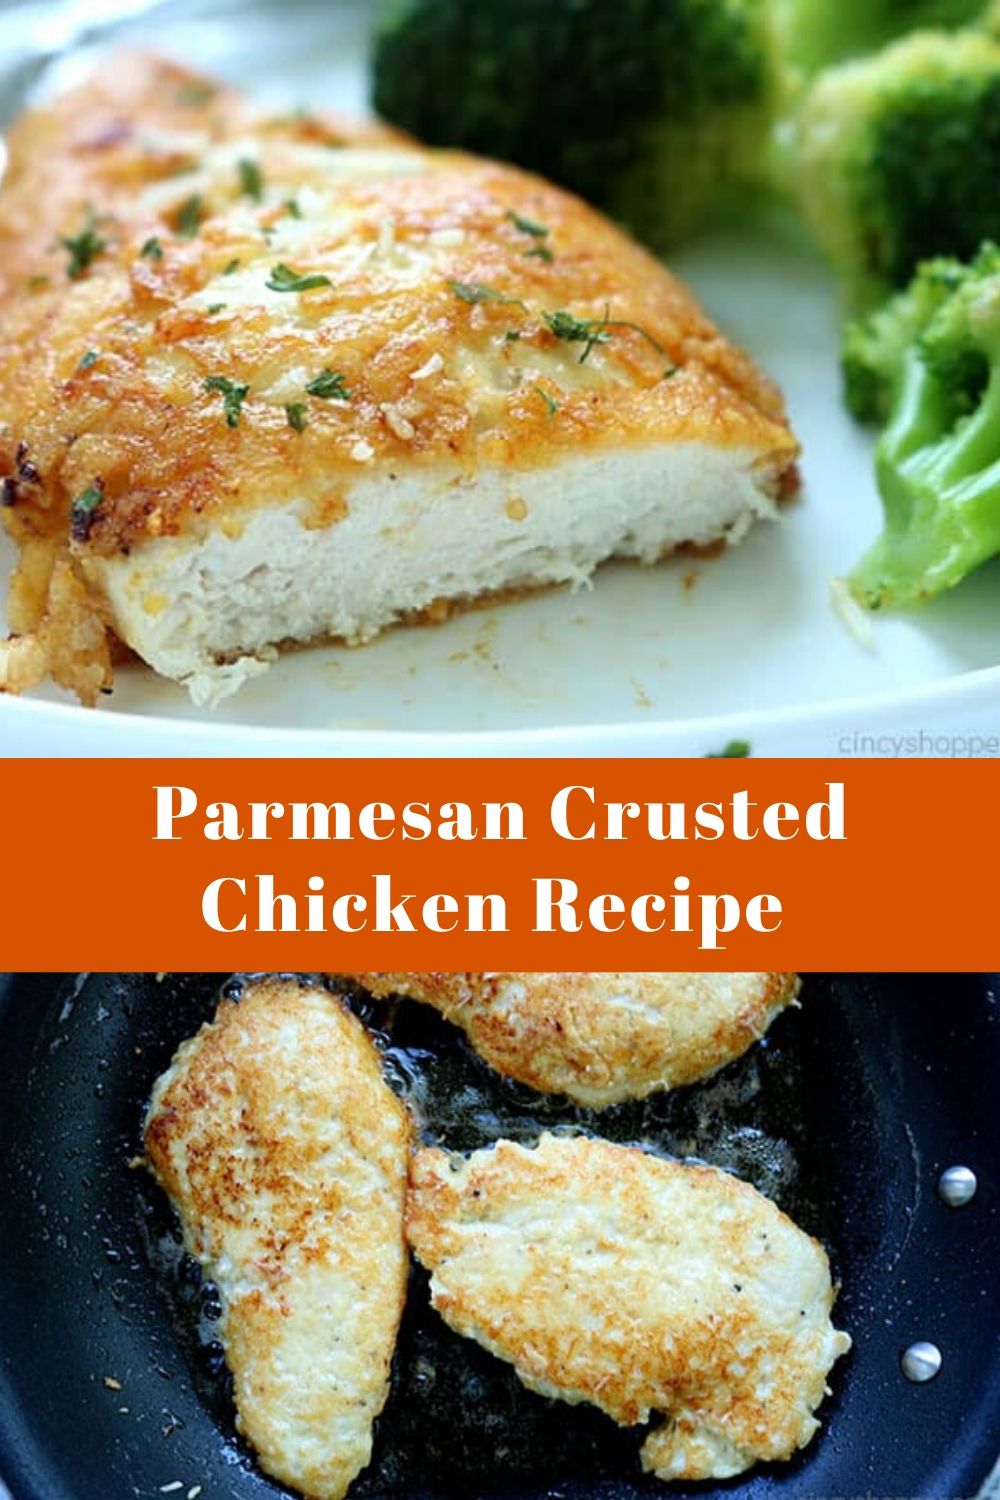 This Parmesan Crusted Chicken Recipe is so Good! - Pinnerfood